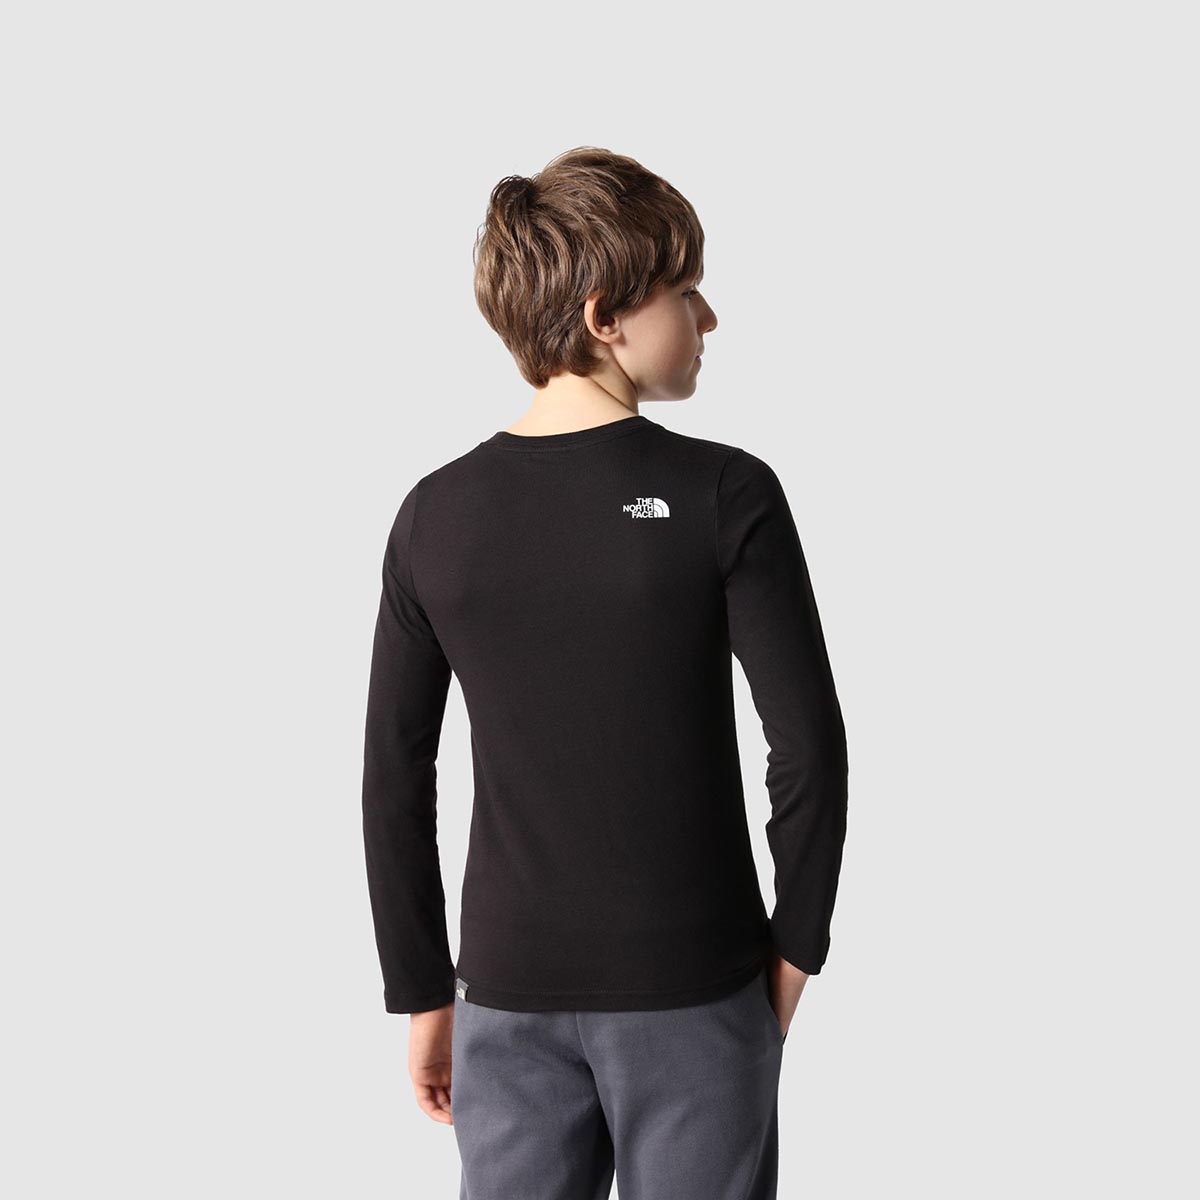 THE NORTH FACE - EASY LONG-SLEEVE SHIRT